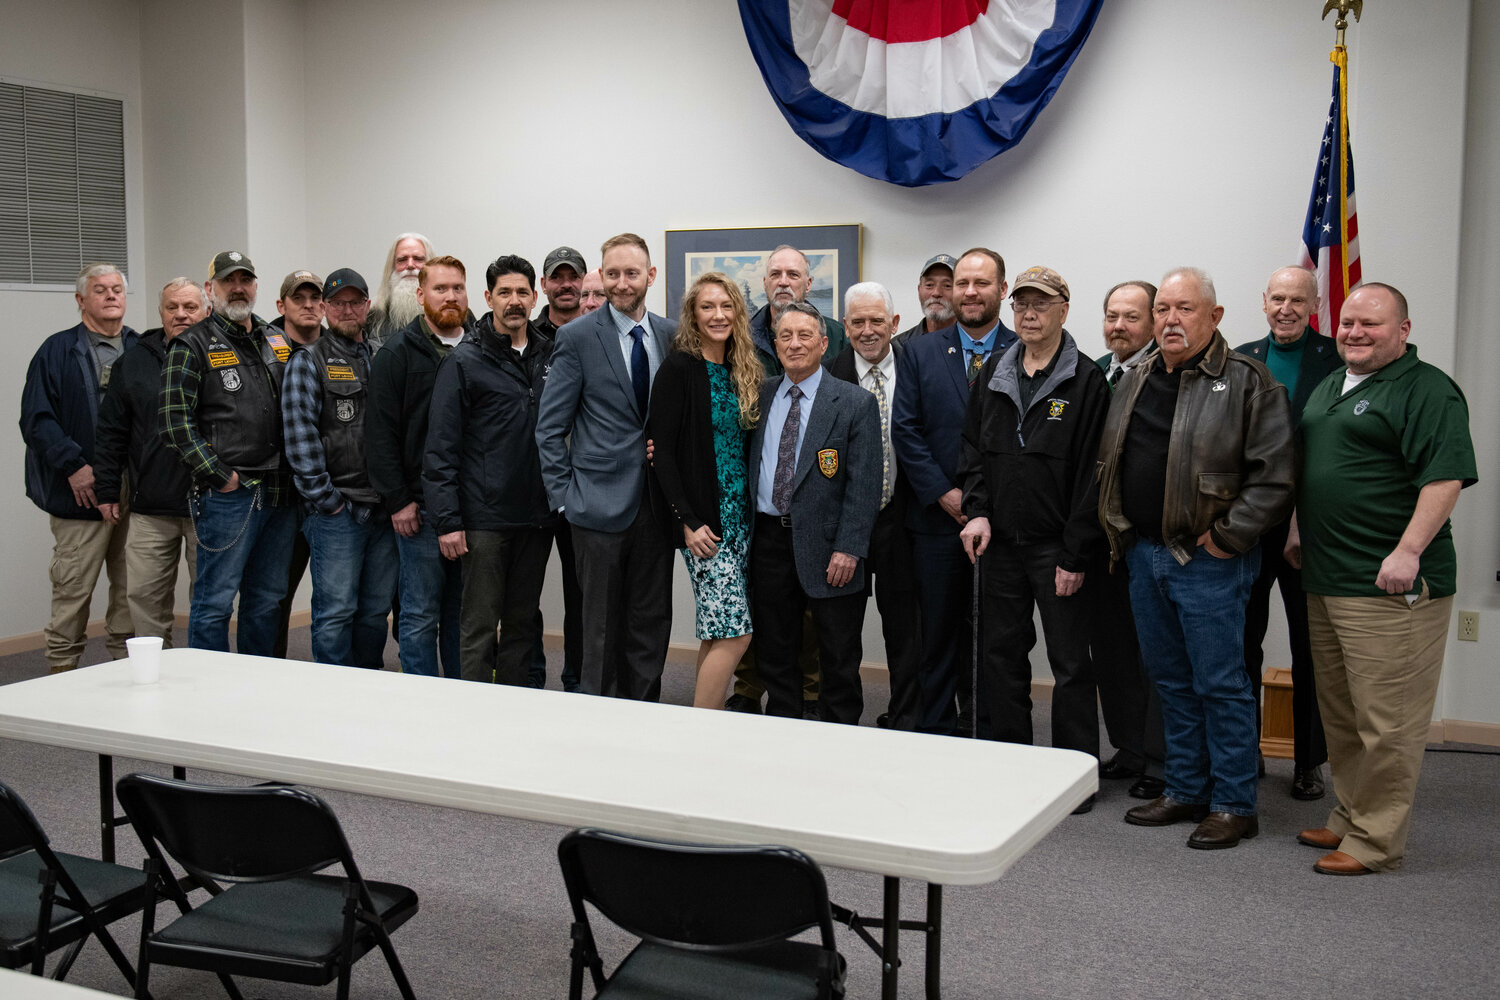 Special Forces personnel in attendance pose for a picture during a ceremony honoring Medal of Honor recipient Franklin D. Miller at the Veterans Memorial Museum in Chehalis on Jan. 5.